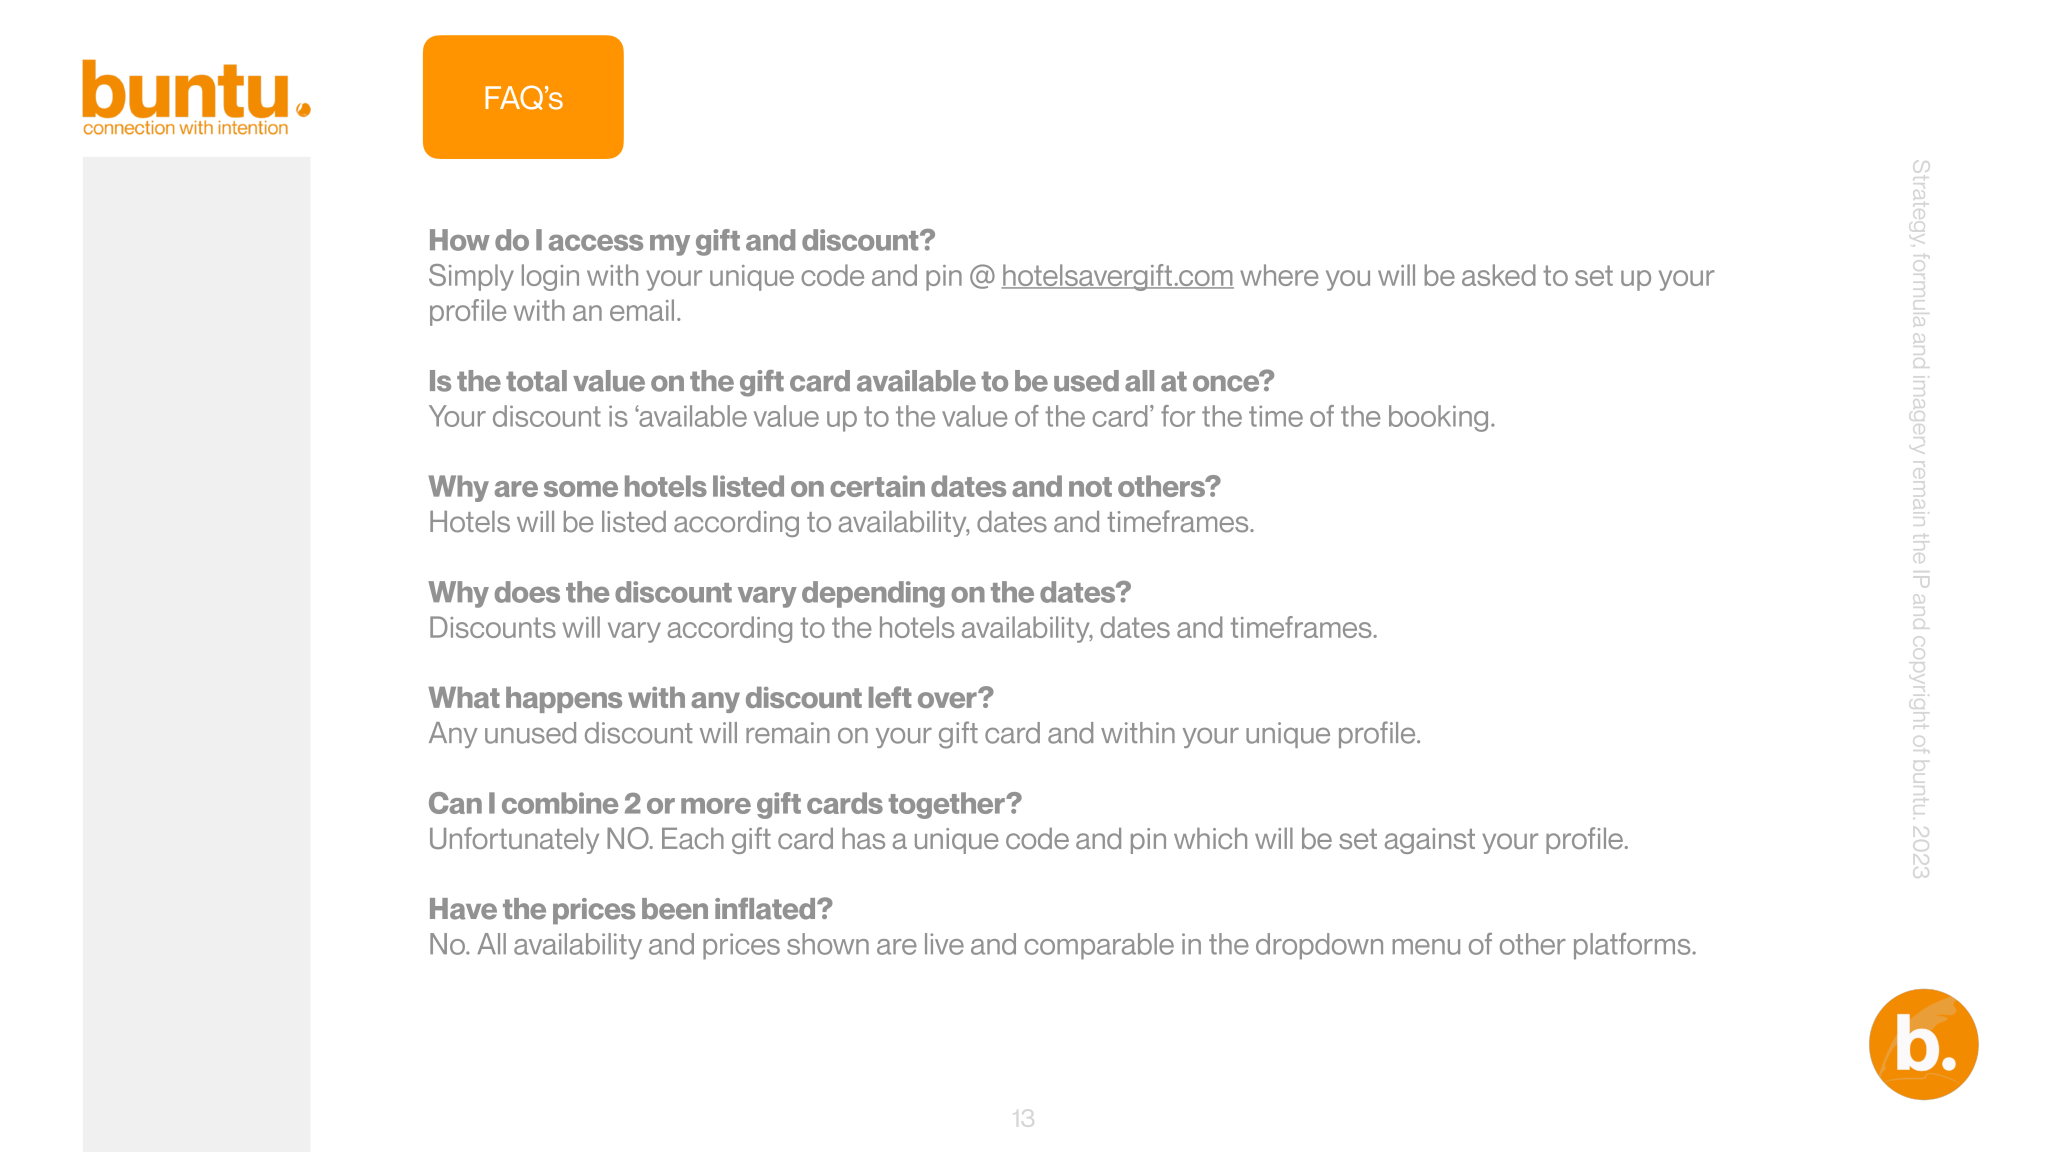 FAQ'S about Hotel Gift Savers